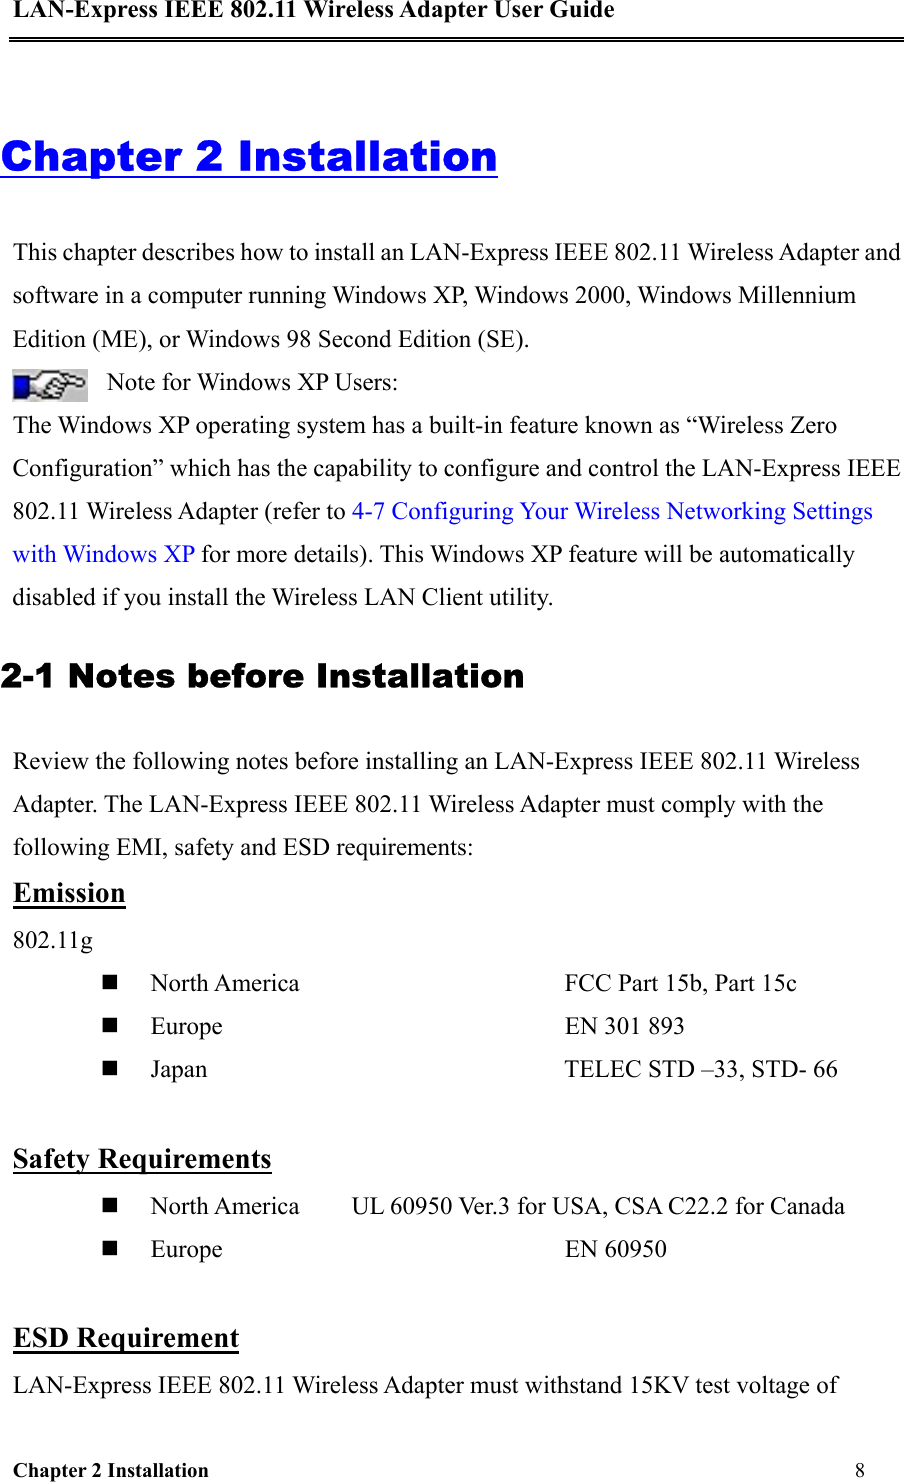 LAN-Express IEEE 802.11 Wireless Adapter User Guide Chapter 2 Installation                                                              8                                            Chapter 2 Installation This chapter describes how to install an LAN-Express IEEE 802.11 Wireless Adapter and software in a computer running Windows XP, Windows 2000, Windows Millennium Edition (ME), or Windows 98 Second Edition (SE).  Note for Windows XP Users:  The Windows XP operating system has a built-in feature known as “Wireless Zero Configuration” which has the capability to configure and control the LAN-Express IEEE 802.11 Wireless Adapter (refer to 4-7 Configuring Your Wireless Networking Settings with Windows XP for more details). This Windows XP feature will be automatically disabled if you install the Wireless LAN Client utility.  2-1 Notes before Installation  Review the following notes before installing an LAN-Express IEEE 802.11 Wireless Adapter. The LAN-Express IEEE 802.11 Wireless Adapter must comply with the following EMI, safety and ESD requirements: Emission 802.11g      North America                         FCC Part 15b, Part 15c   Europe                      EN 301 893   Japan                                  TELEC STD –33, STD- 66  Safety Requirements   North America   UL 60950 Ver.3 for USA, CSA C22.2 for Canada   Europe         EN 60950  ESD Requirement LAN-Express IEEE 802.11 Wireless Adapter must withstand 15KV test voltage of 